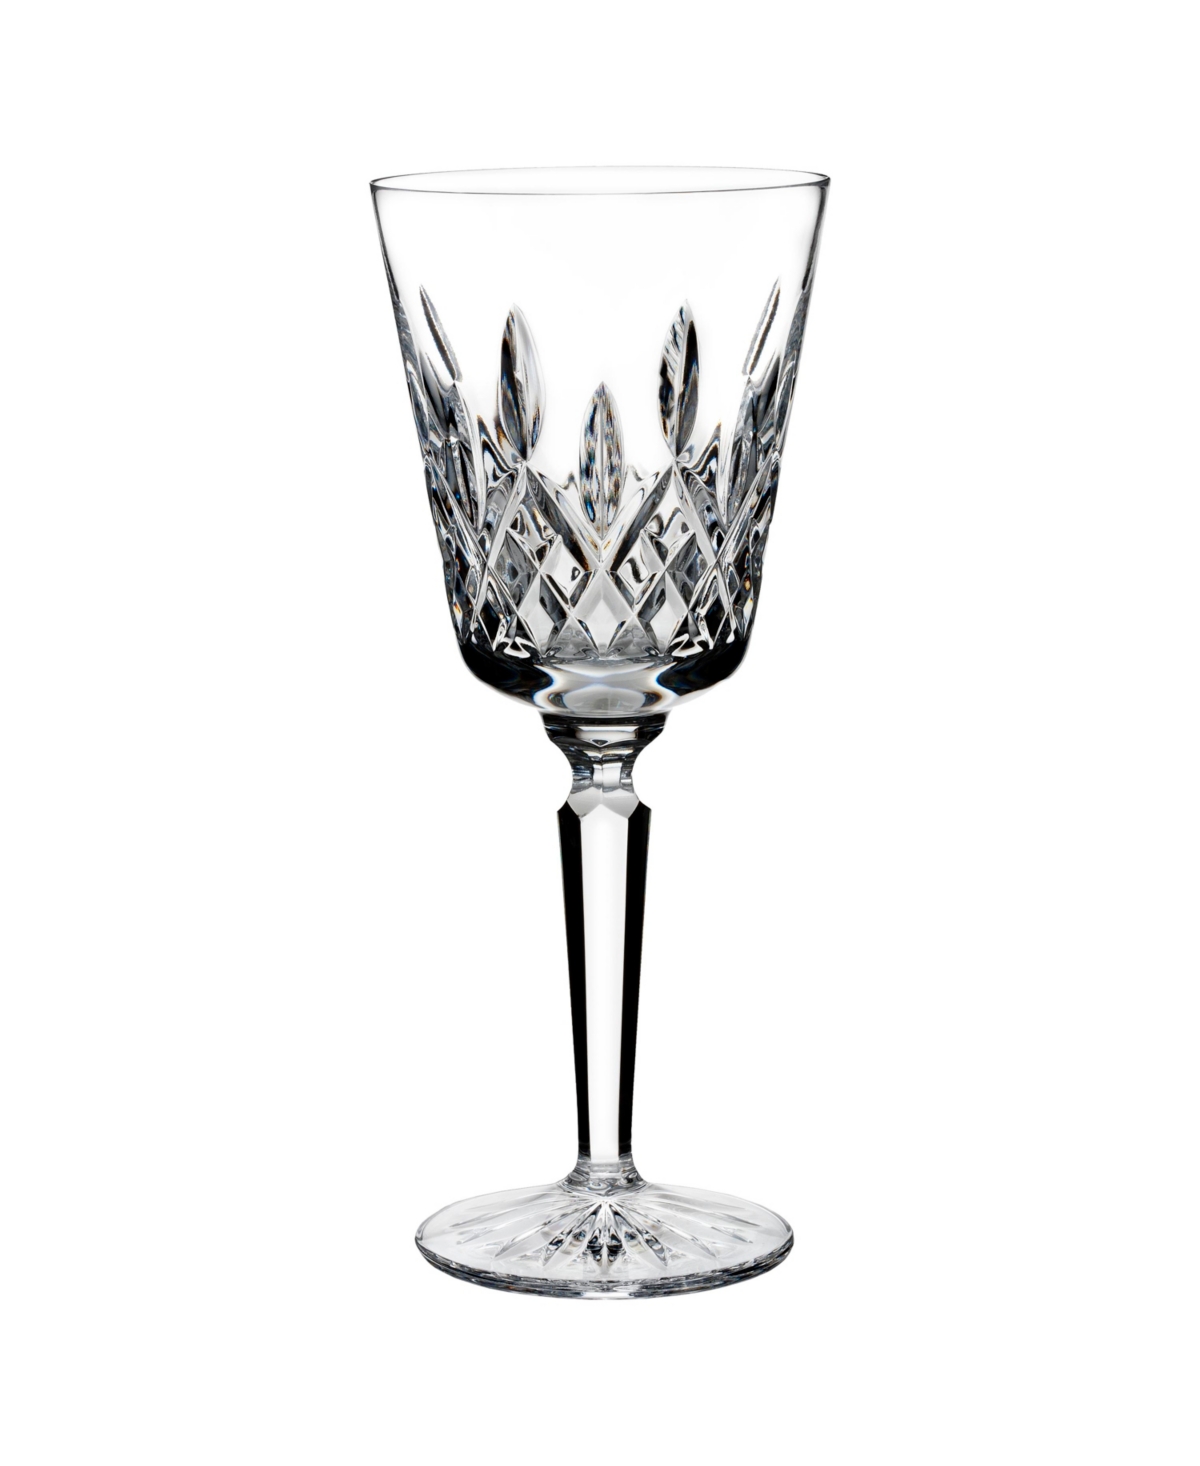 Waterford Lismore Tall Goblet, 10 oz In No Color